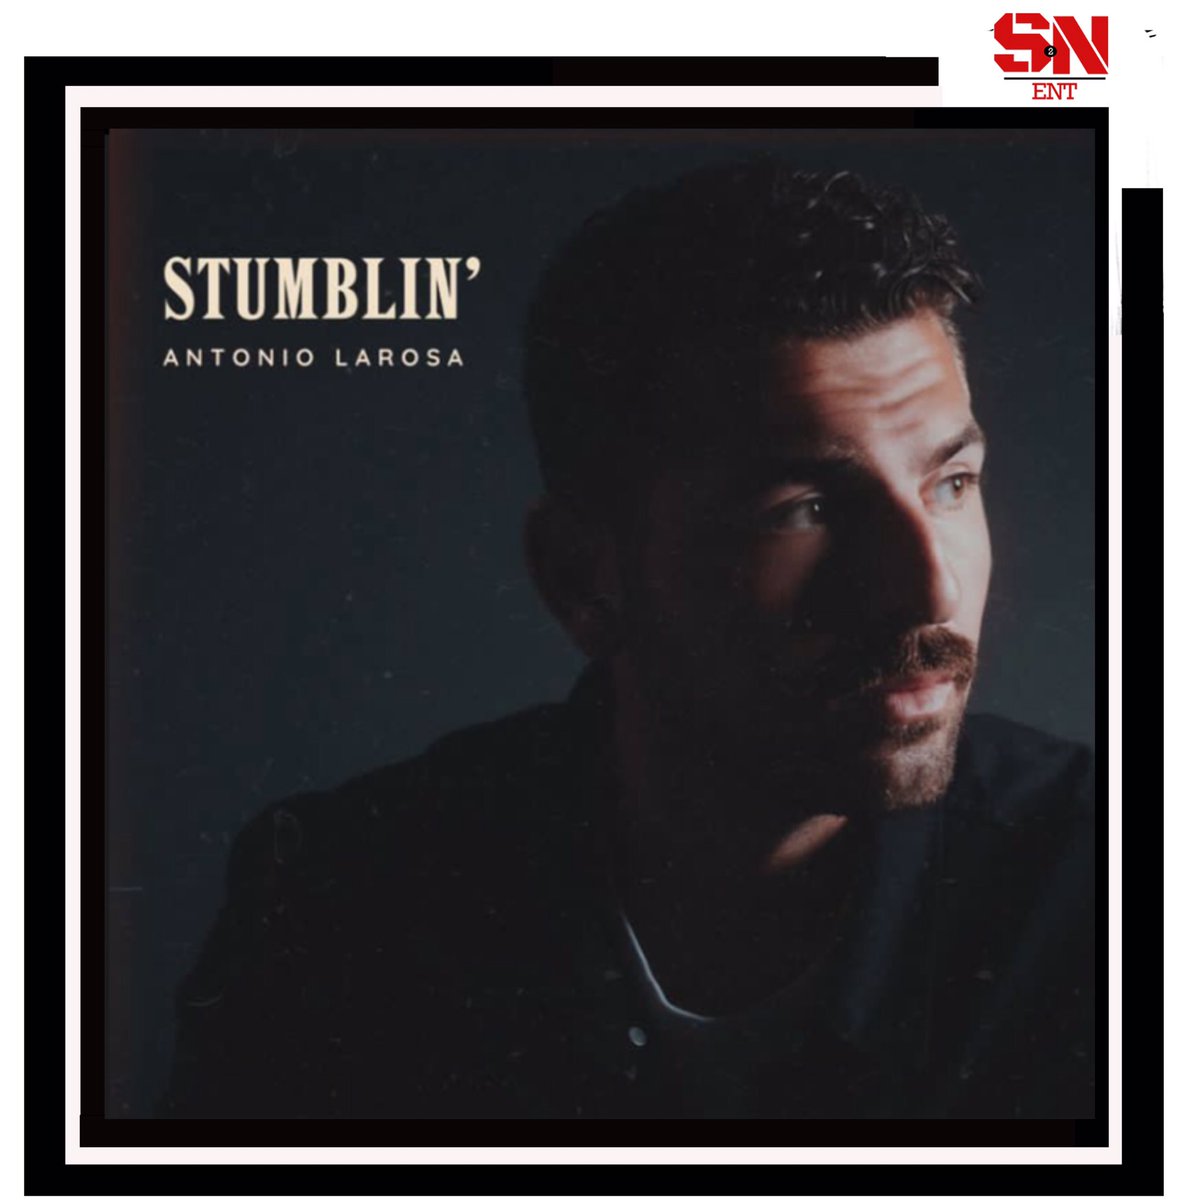 Have you checked out @AntonioLarosa ‘s album “STUMBLIN” it’s out on different streaming platforms and already doing good….

Make your playlist colorful by adding it up…

#newalbum @stumblin  #vancouver #newrelease